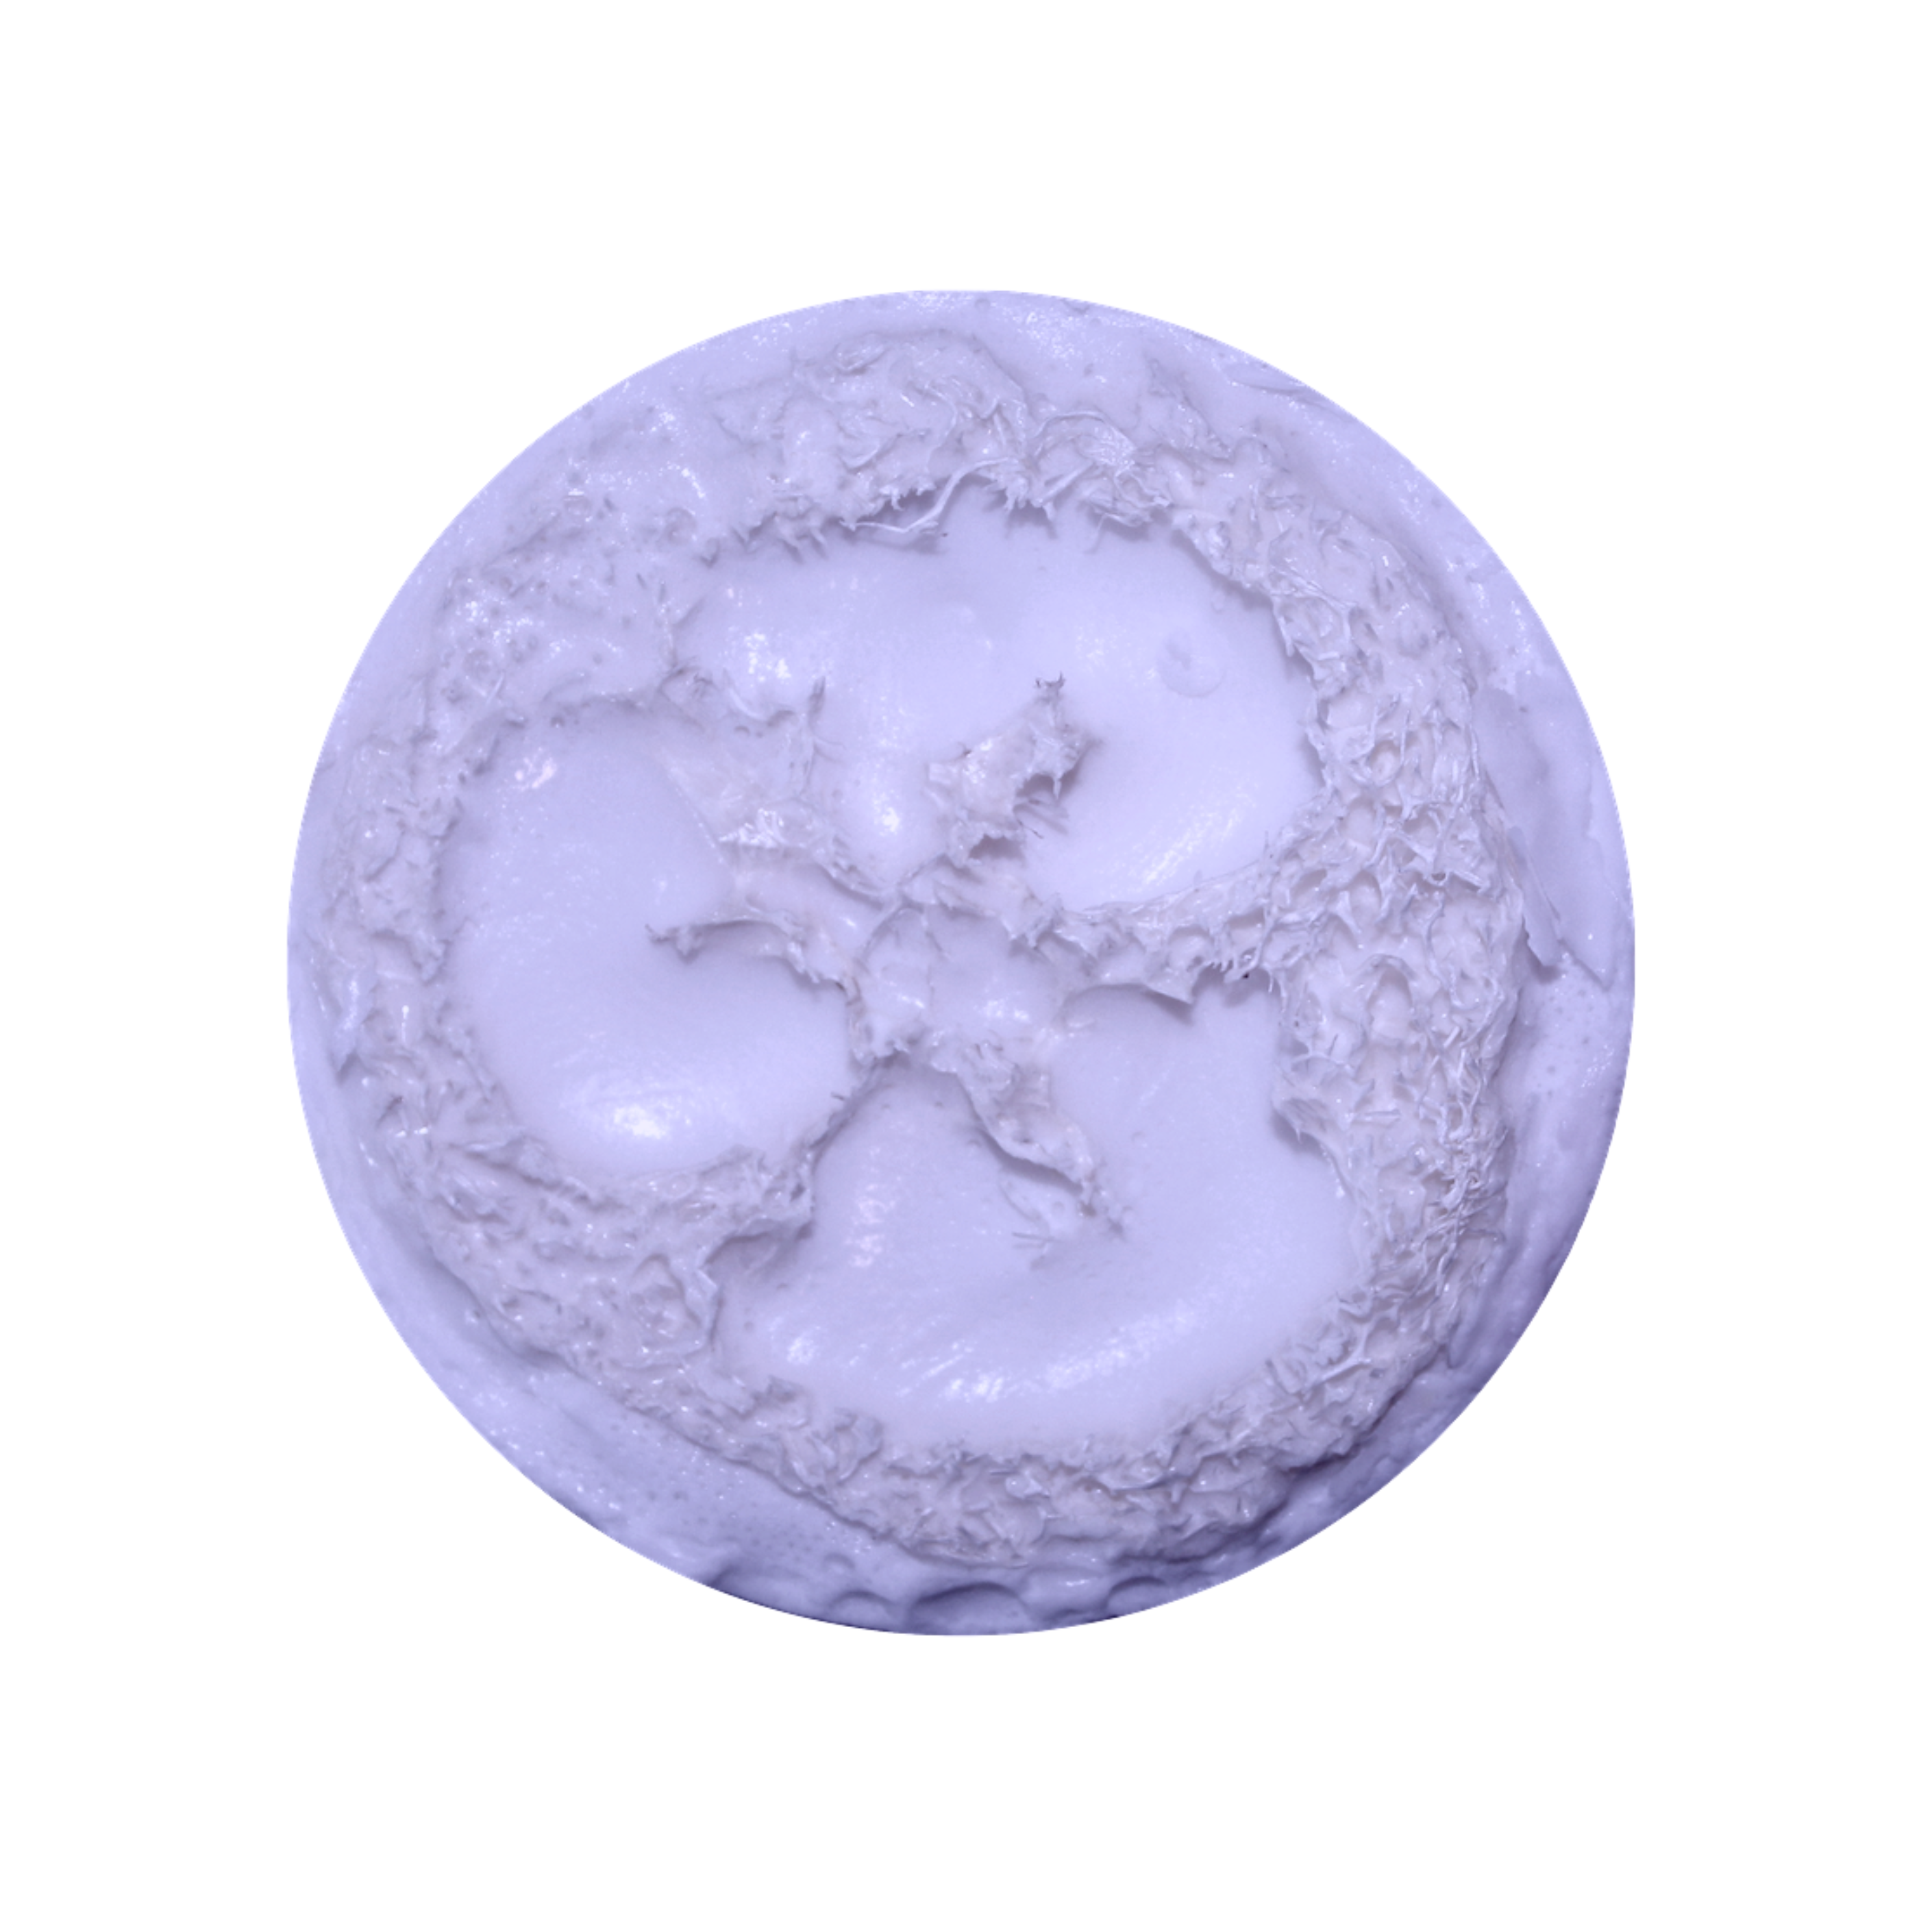 Lavender purple loofah soap is a great sustainable beauty product option for your spa &amp;salon. It made with natural biodegradable loofah with soap, making it a convenient daily exfoliator for dry to normal skin